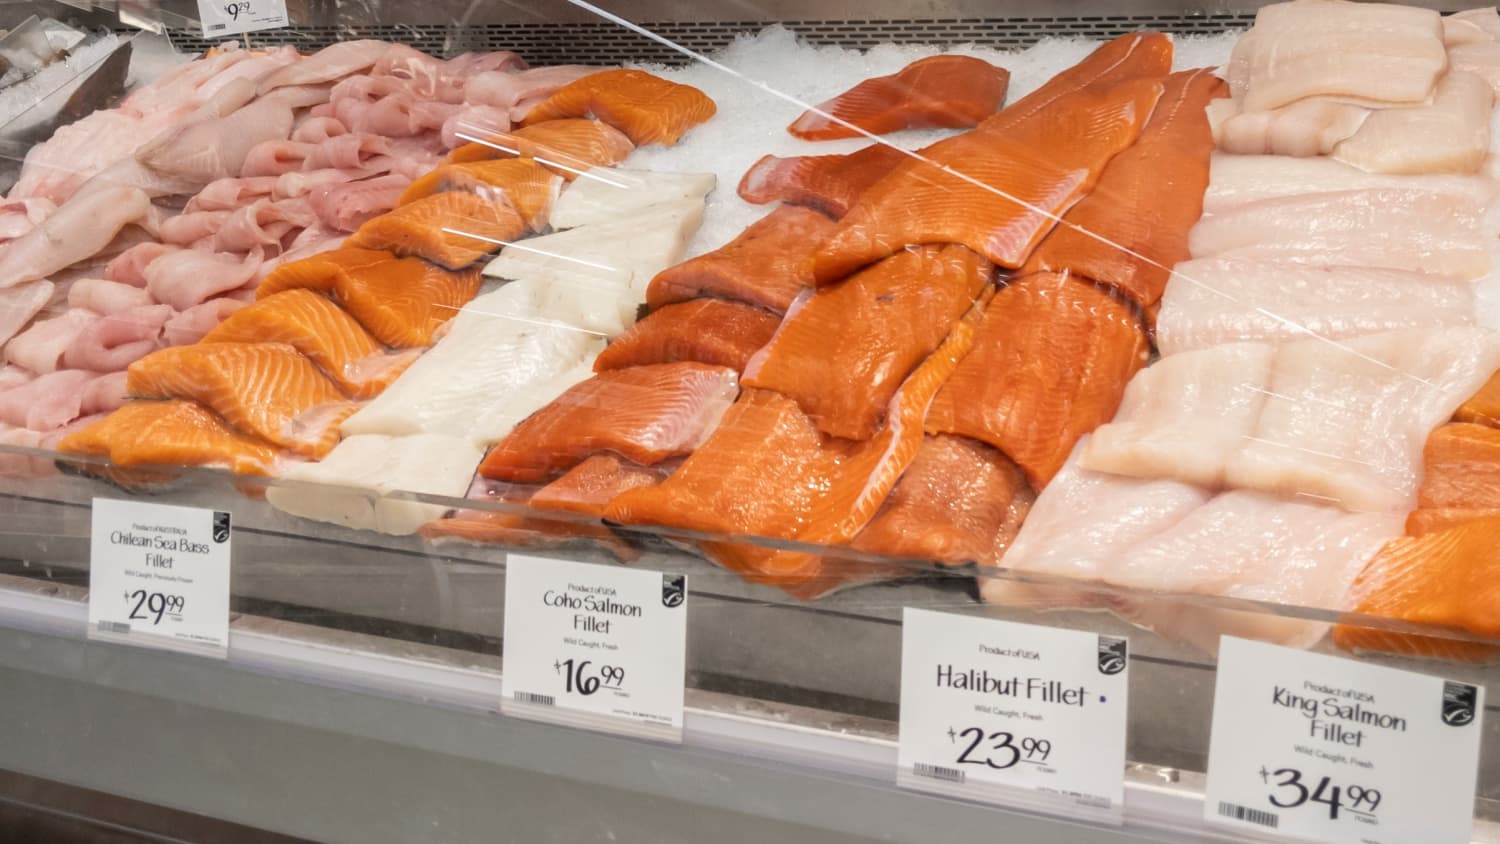 Whole Foods Seafood Counter Hack - Season and Steam for Free